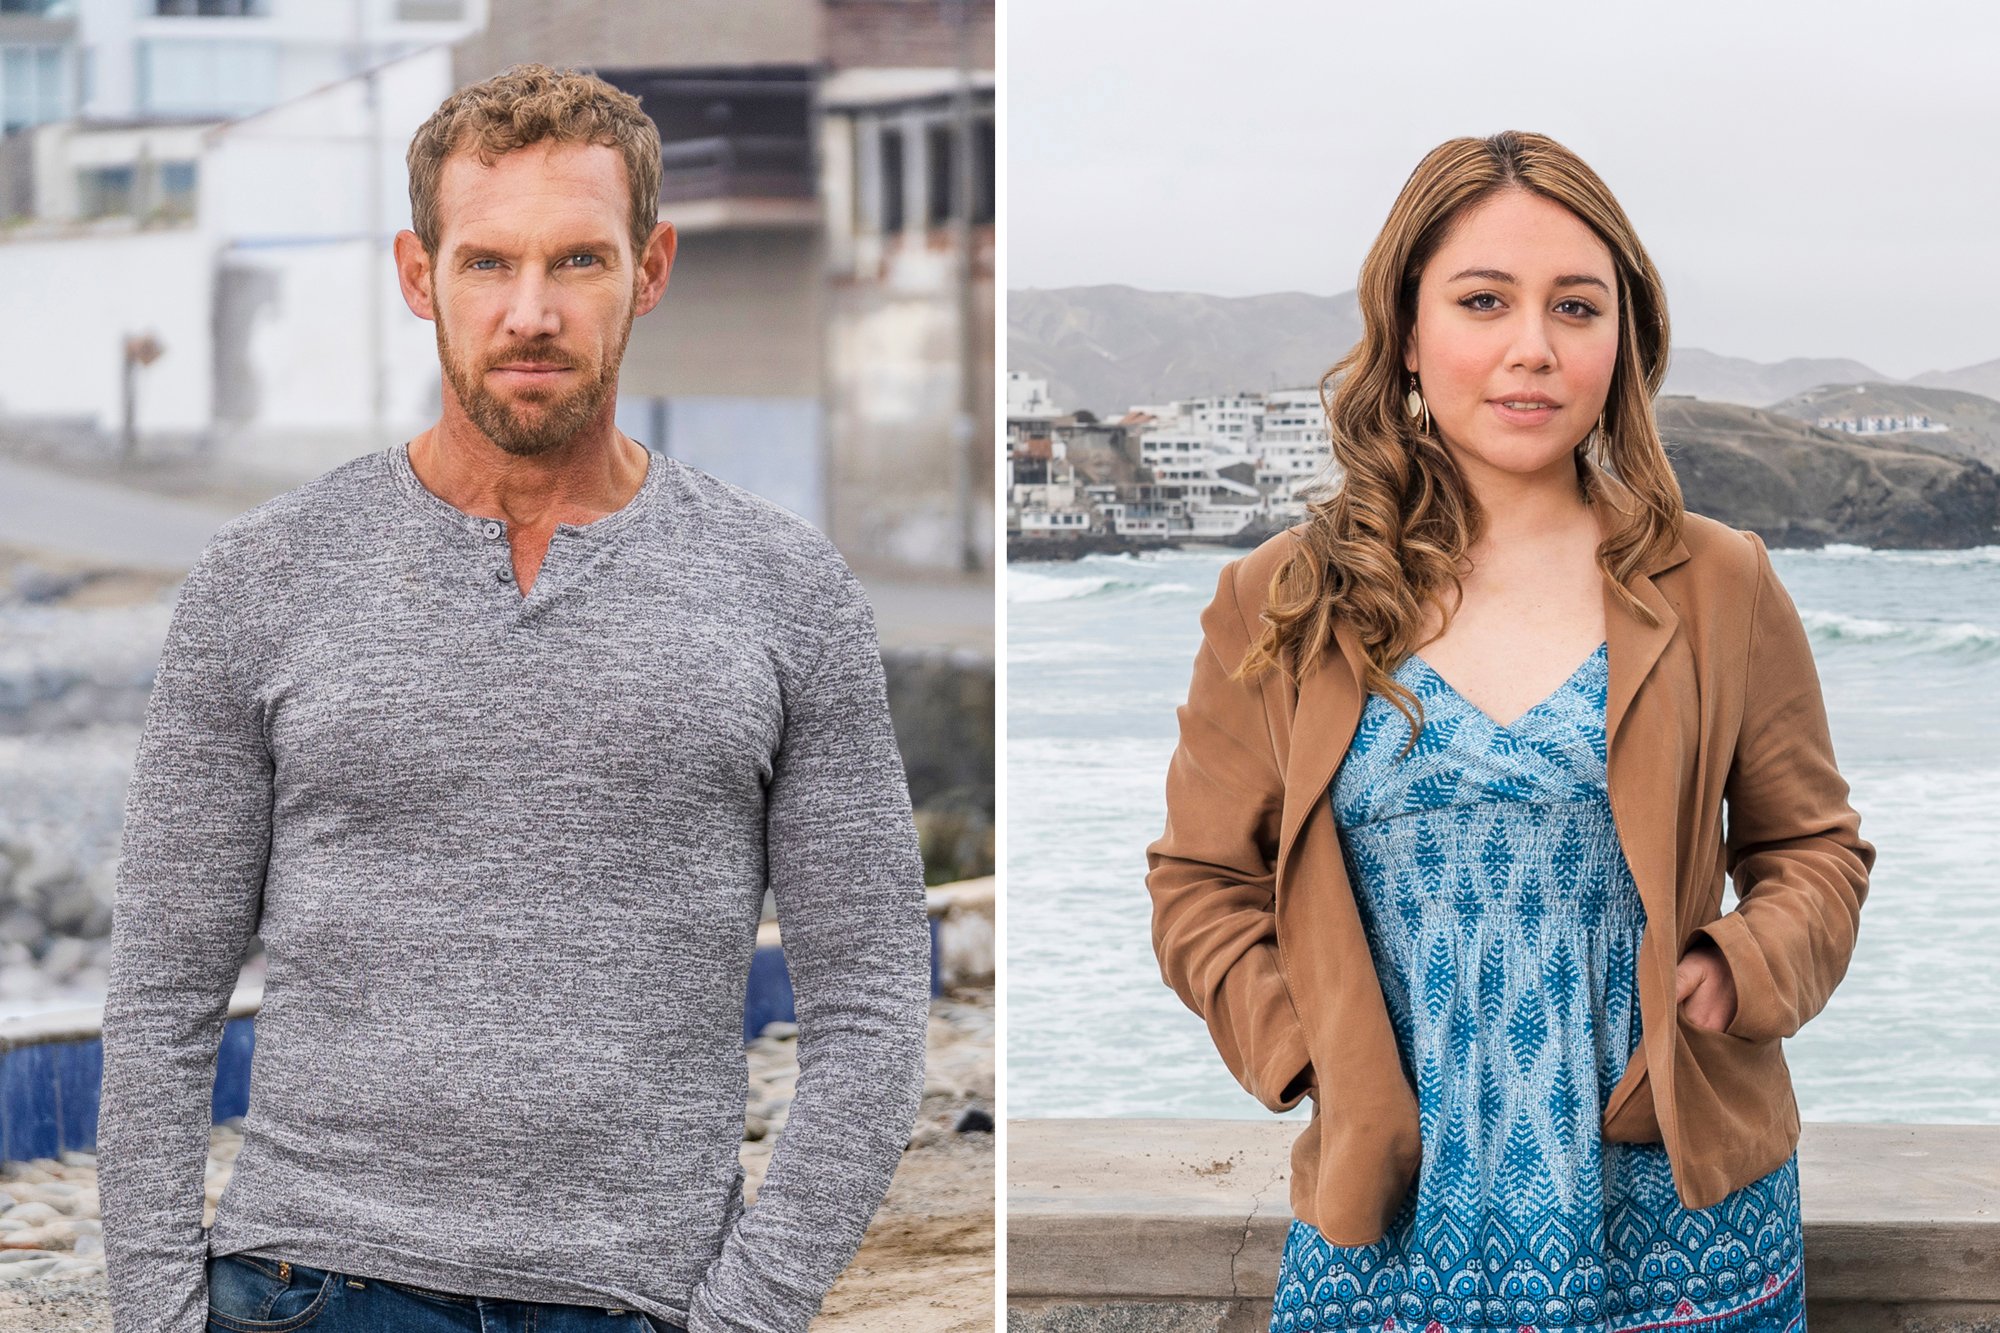 'Before the 90 Days' star Mahogany wearing a floral top and Ben wearing a gray long sleeved shirt in a promotional image for the show